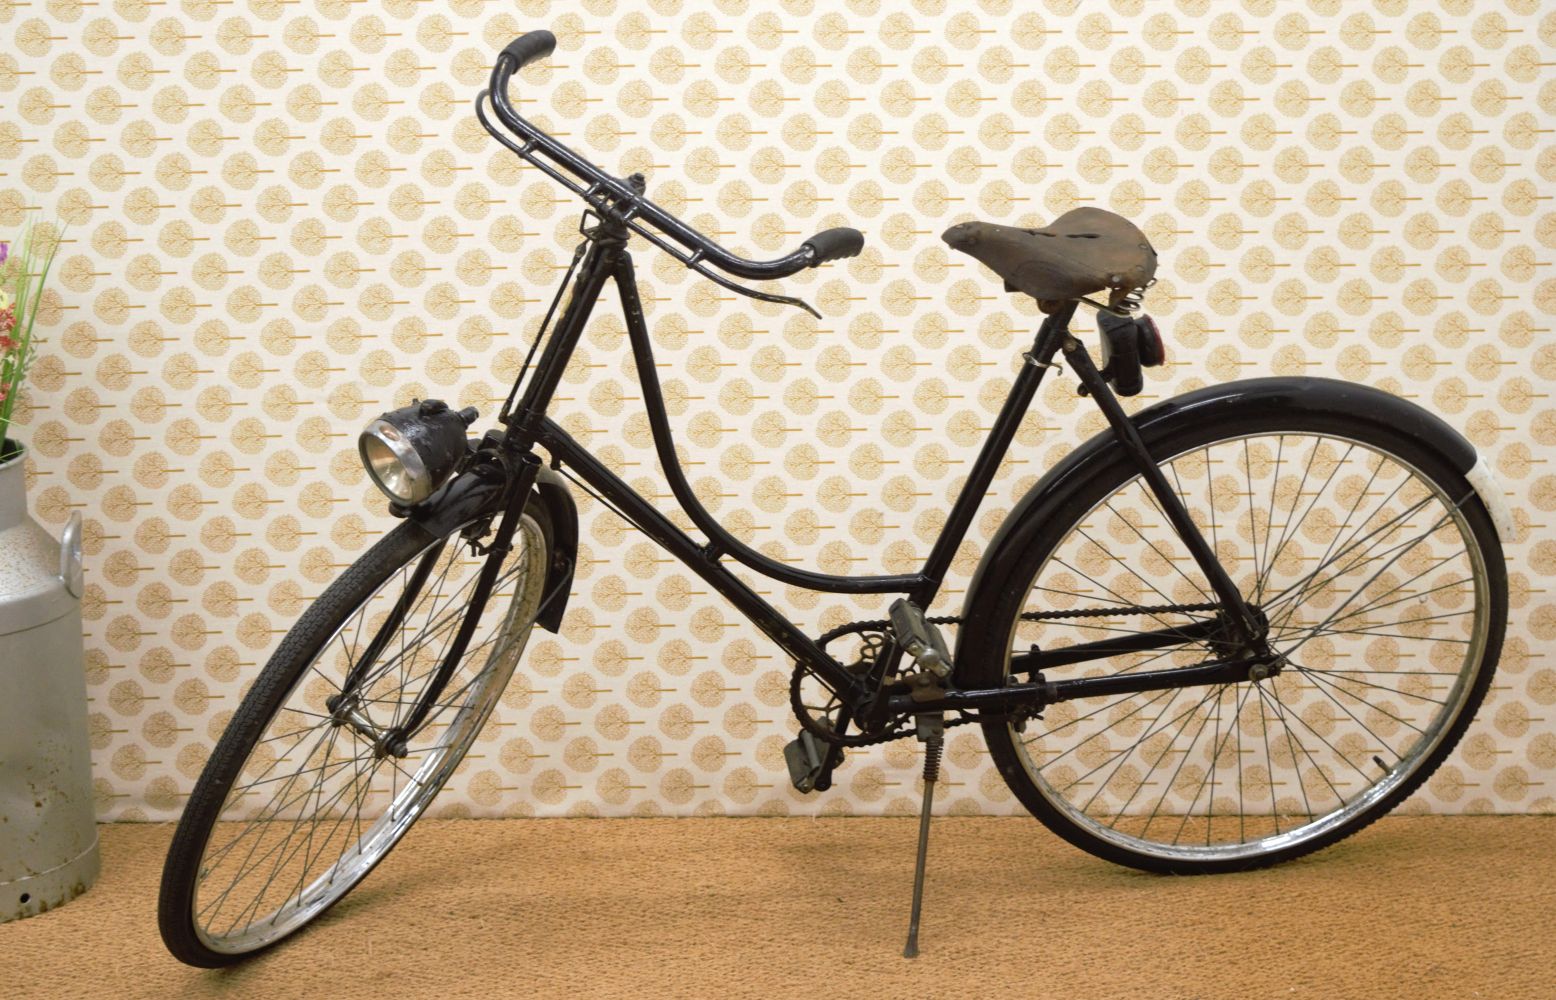 B.S.A. LADY'S VINTAGE BICYCLE - Image 2 of 5